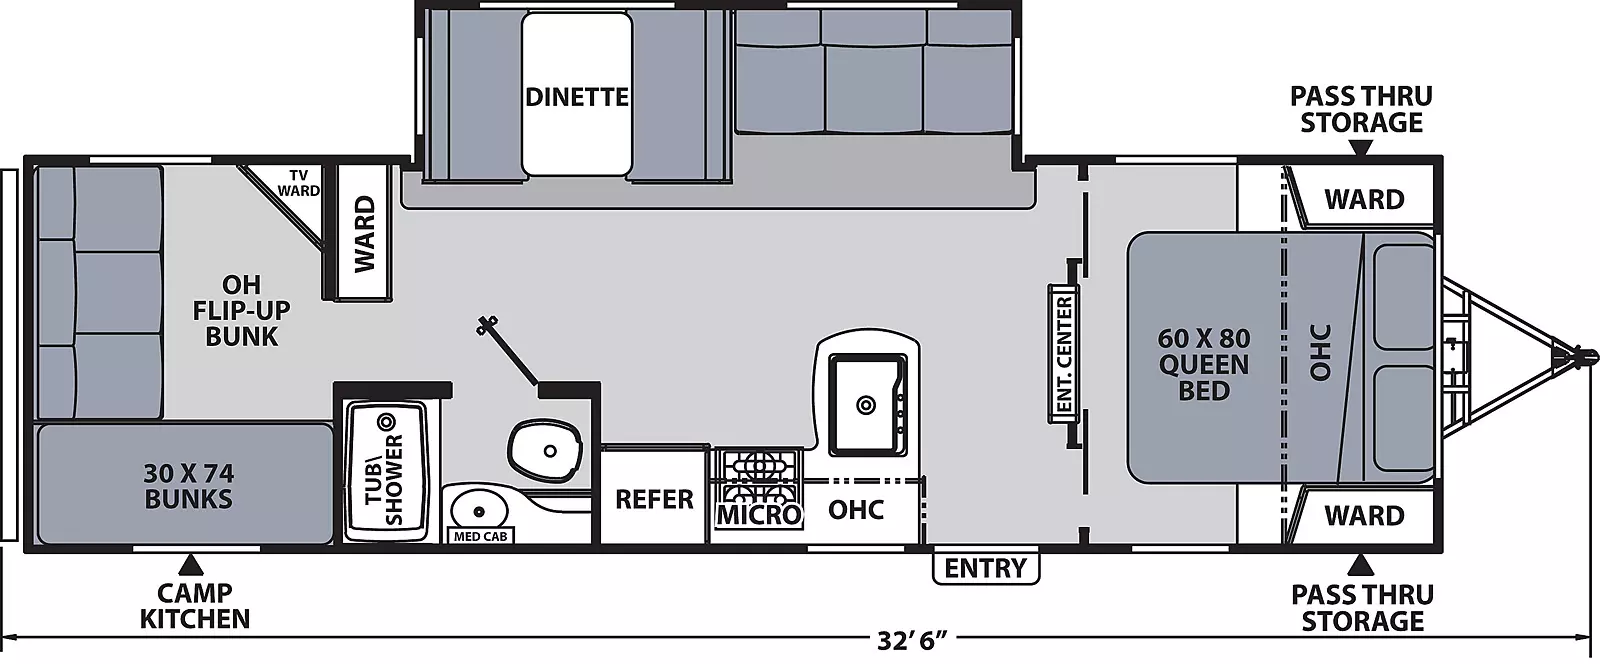 The 289TBSS has one slide out on the off-door side and one entry door on the door side. Interior layout from front to back: front bedroom with foot facing queen bed, overhead cabinet, and wardrobes on either side of the bed; entertainment center between bedroom and kitchen living dining area; off-door side slide out containing sofa and dinette; door side kitchen containing sink, overhead cabinet, cook top stove, microwave overhead, and refrigerator; door side bathroom containing tub/shower, toilet and medicine cabinet; off-door side wardrobe; rear bunk room containing two bunks on the door side, one flip-up bunk at the rear, and television wardrobe storage cabinet; exterior camp kitchen at the rear 